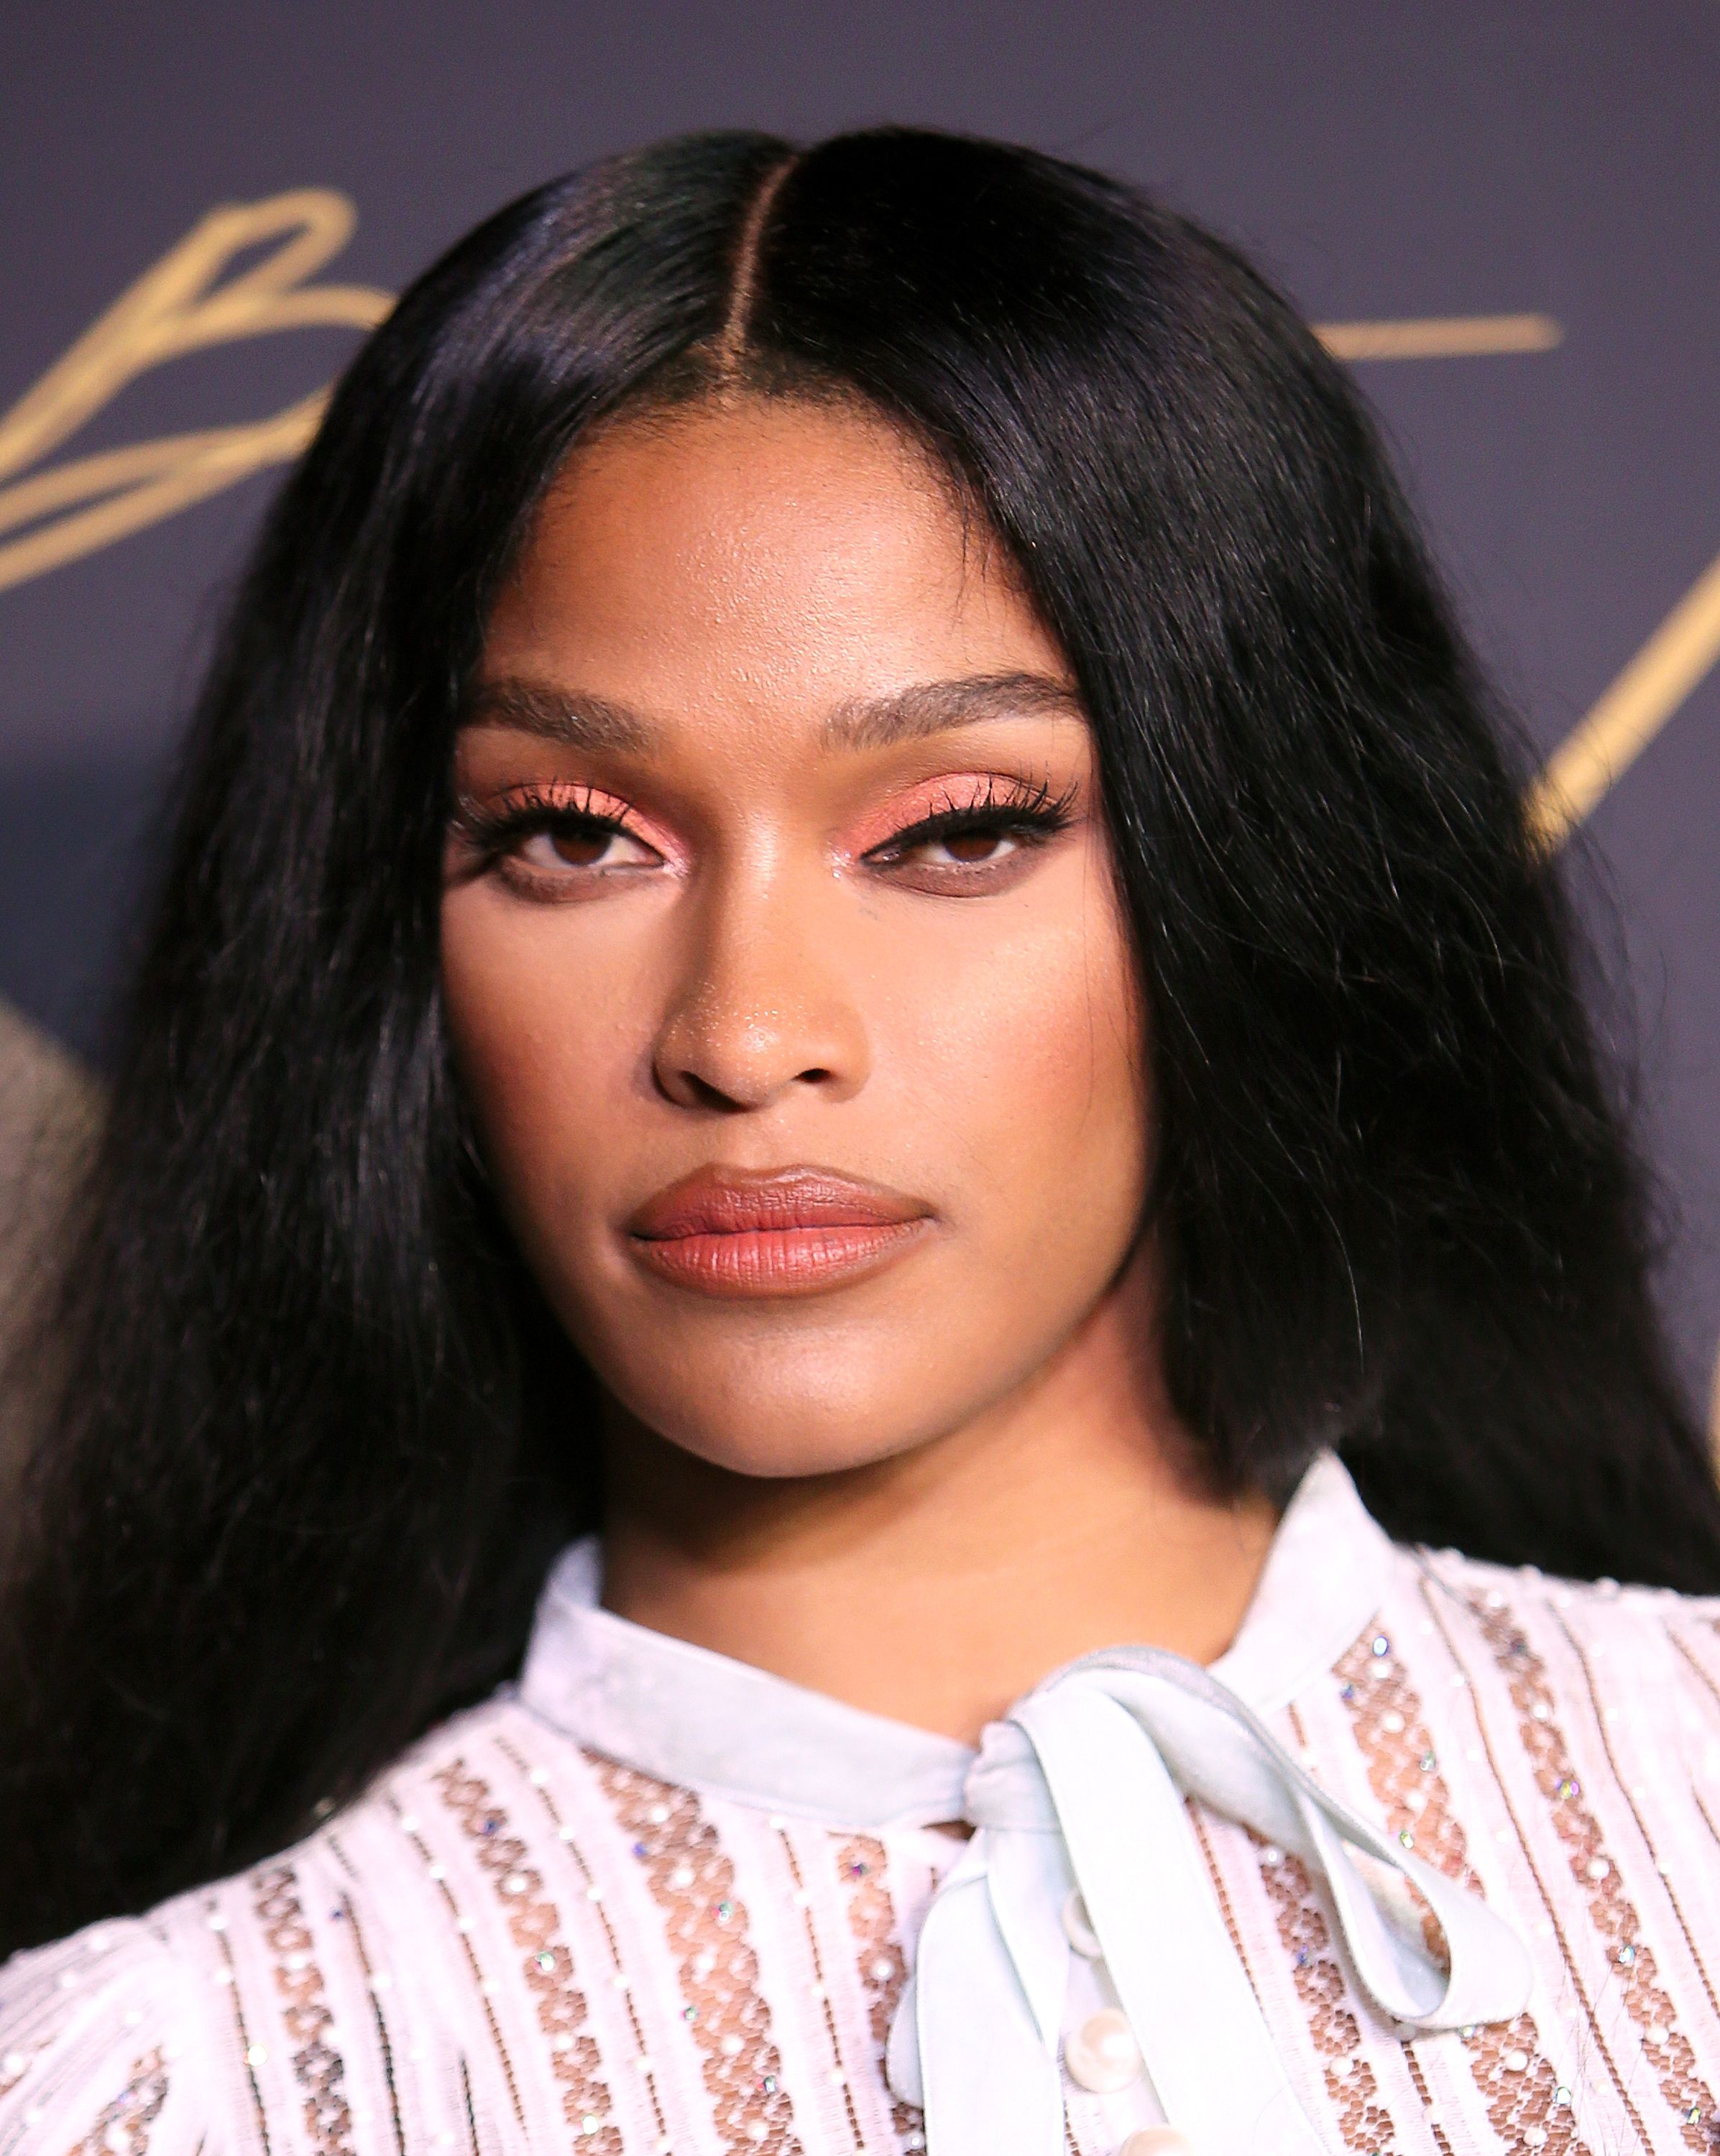 Joseline Hernandez at a party on June 24, 2017 in California. | Photo: Getty Images